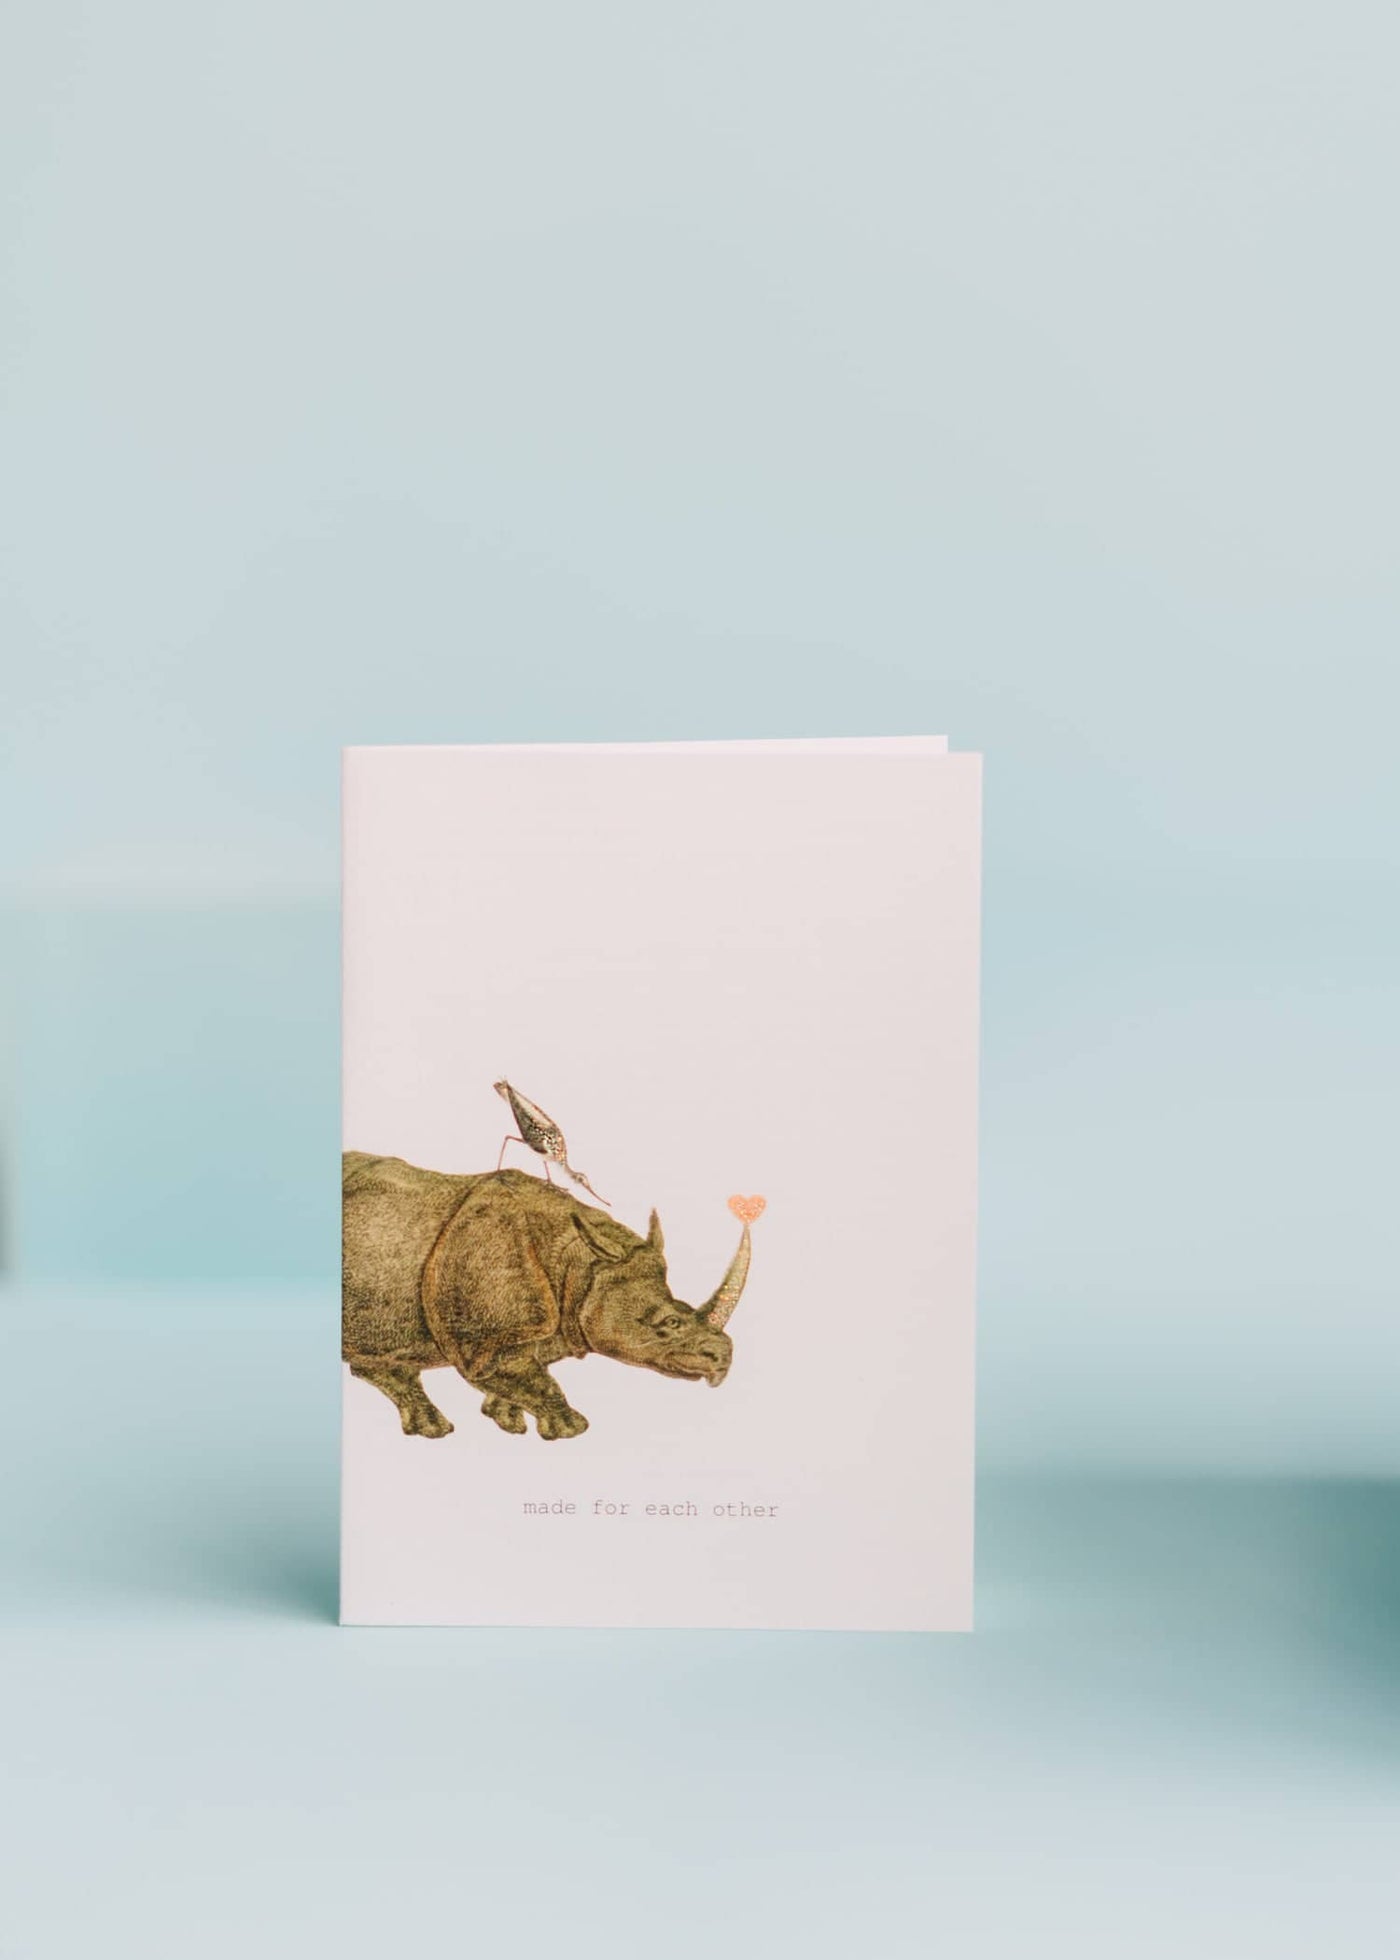 GREETING CARD "MADE FOR EACH OTHER"